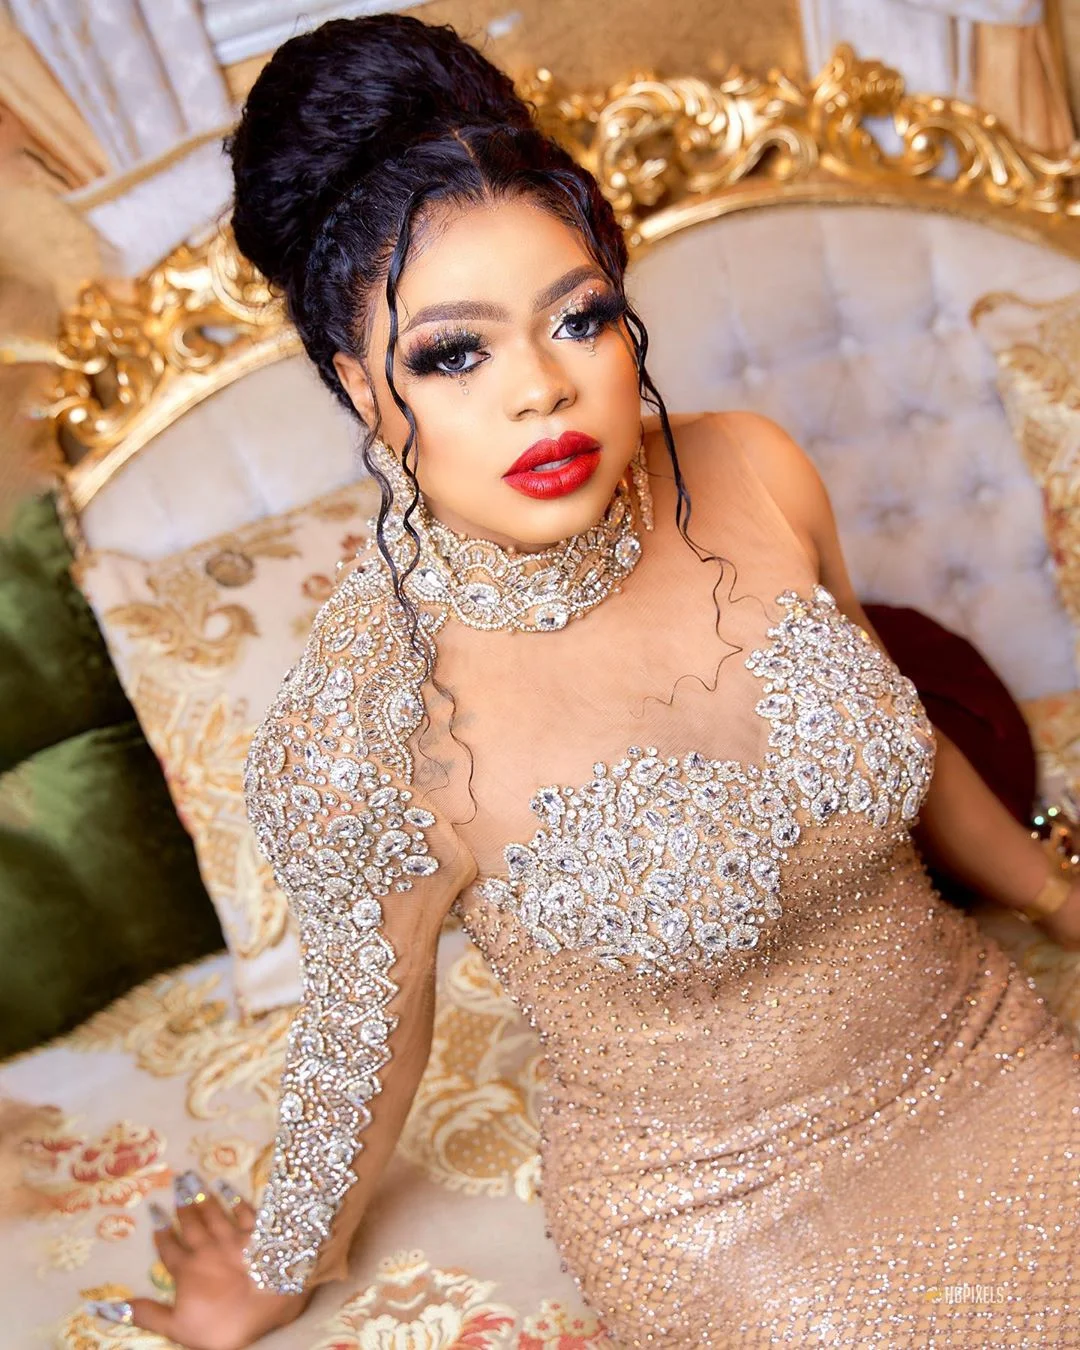 "Billionaires See Me As a Hot Badd!e. I'm Living The Real Baby Girl Lifestyle" – Bobrisky